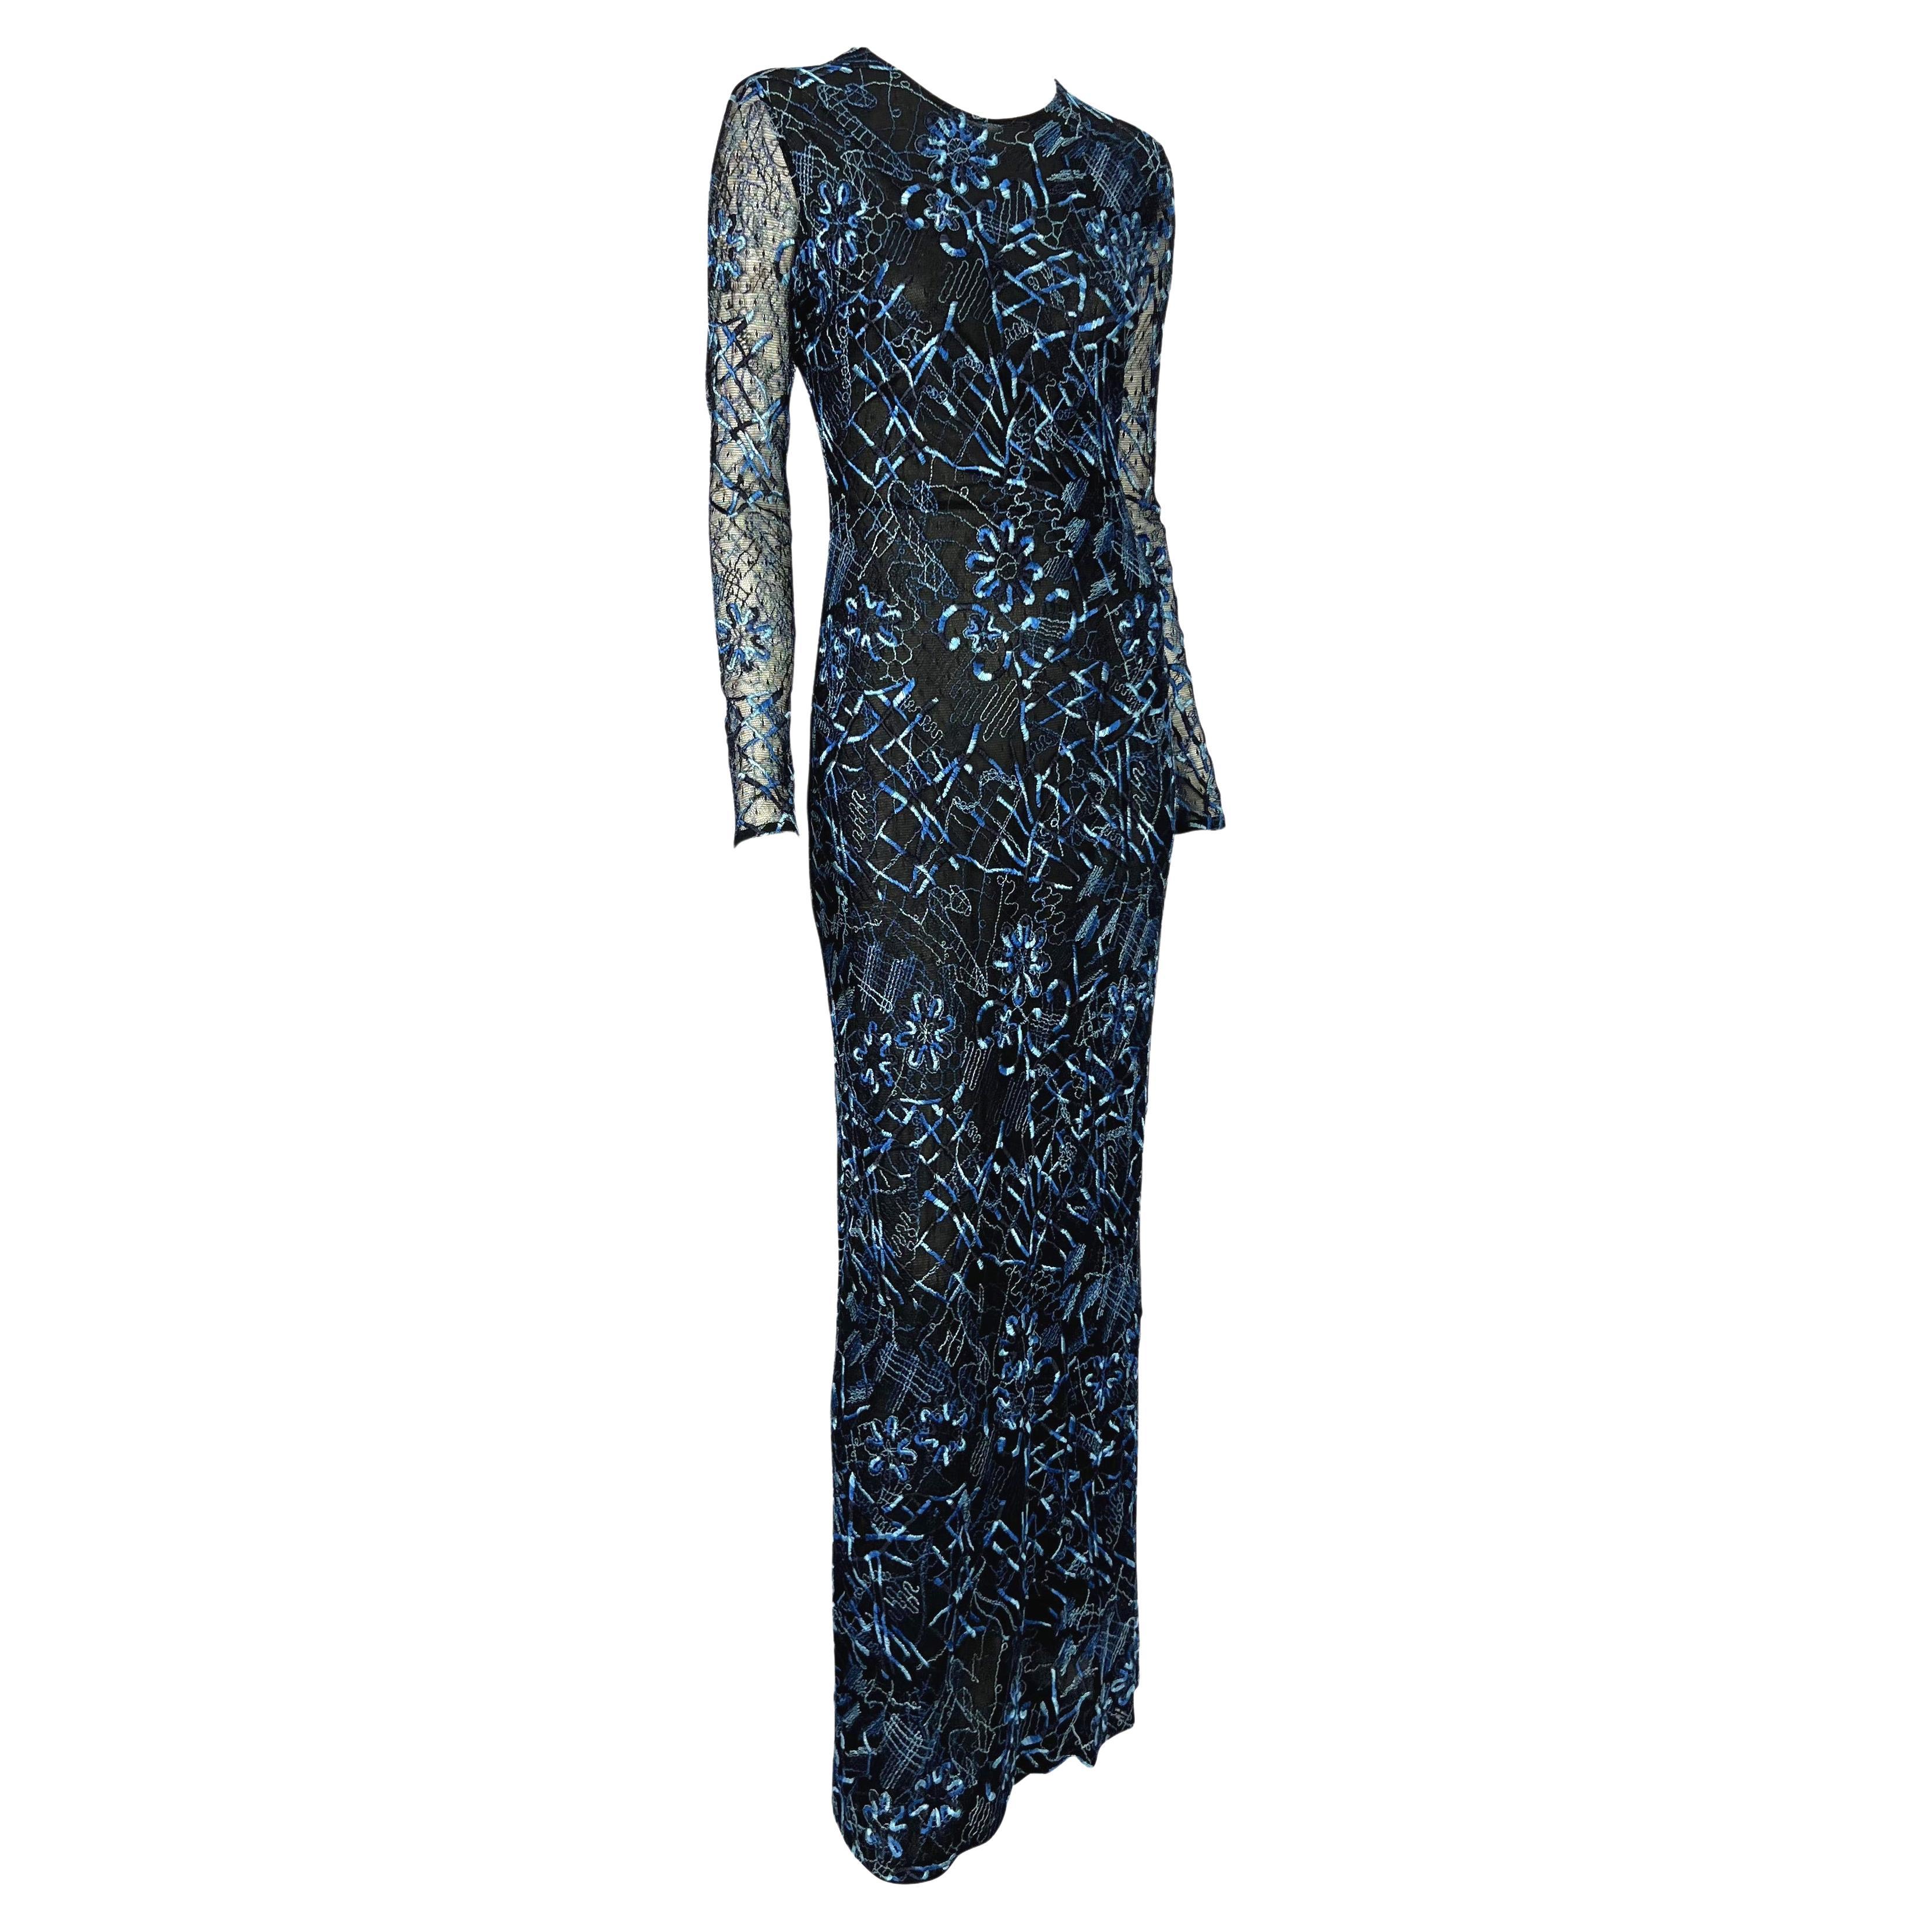 S/S 1998 Christian Lacroix Black Stretch Sheer Mesh Blue Embroidered Maxi Dress For Sale 5